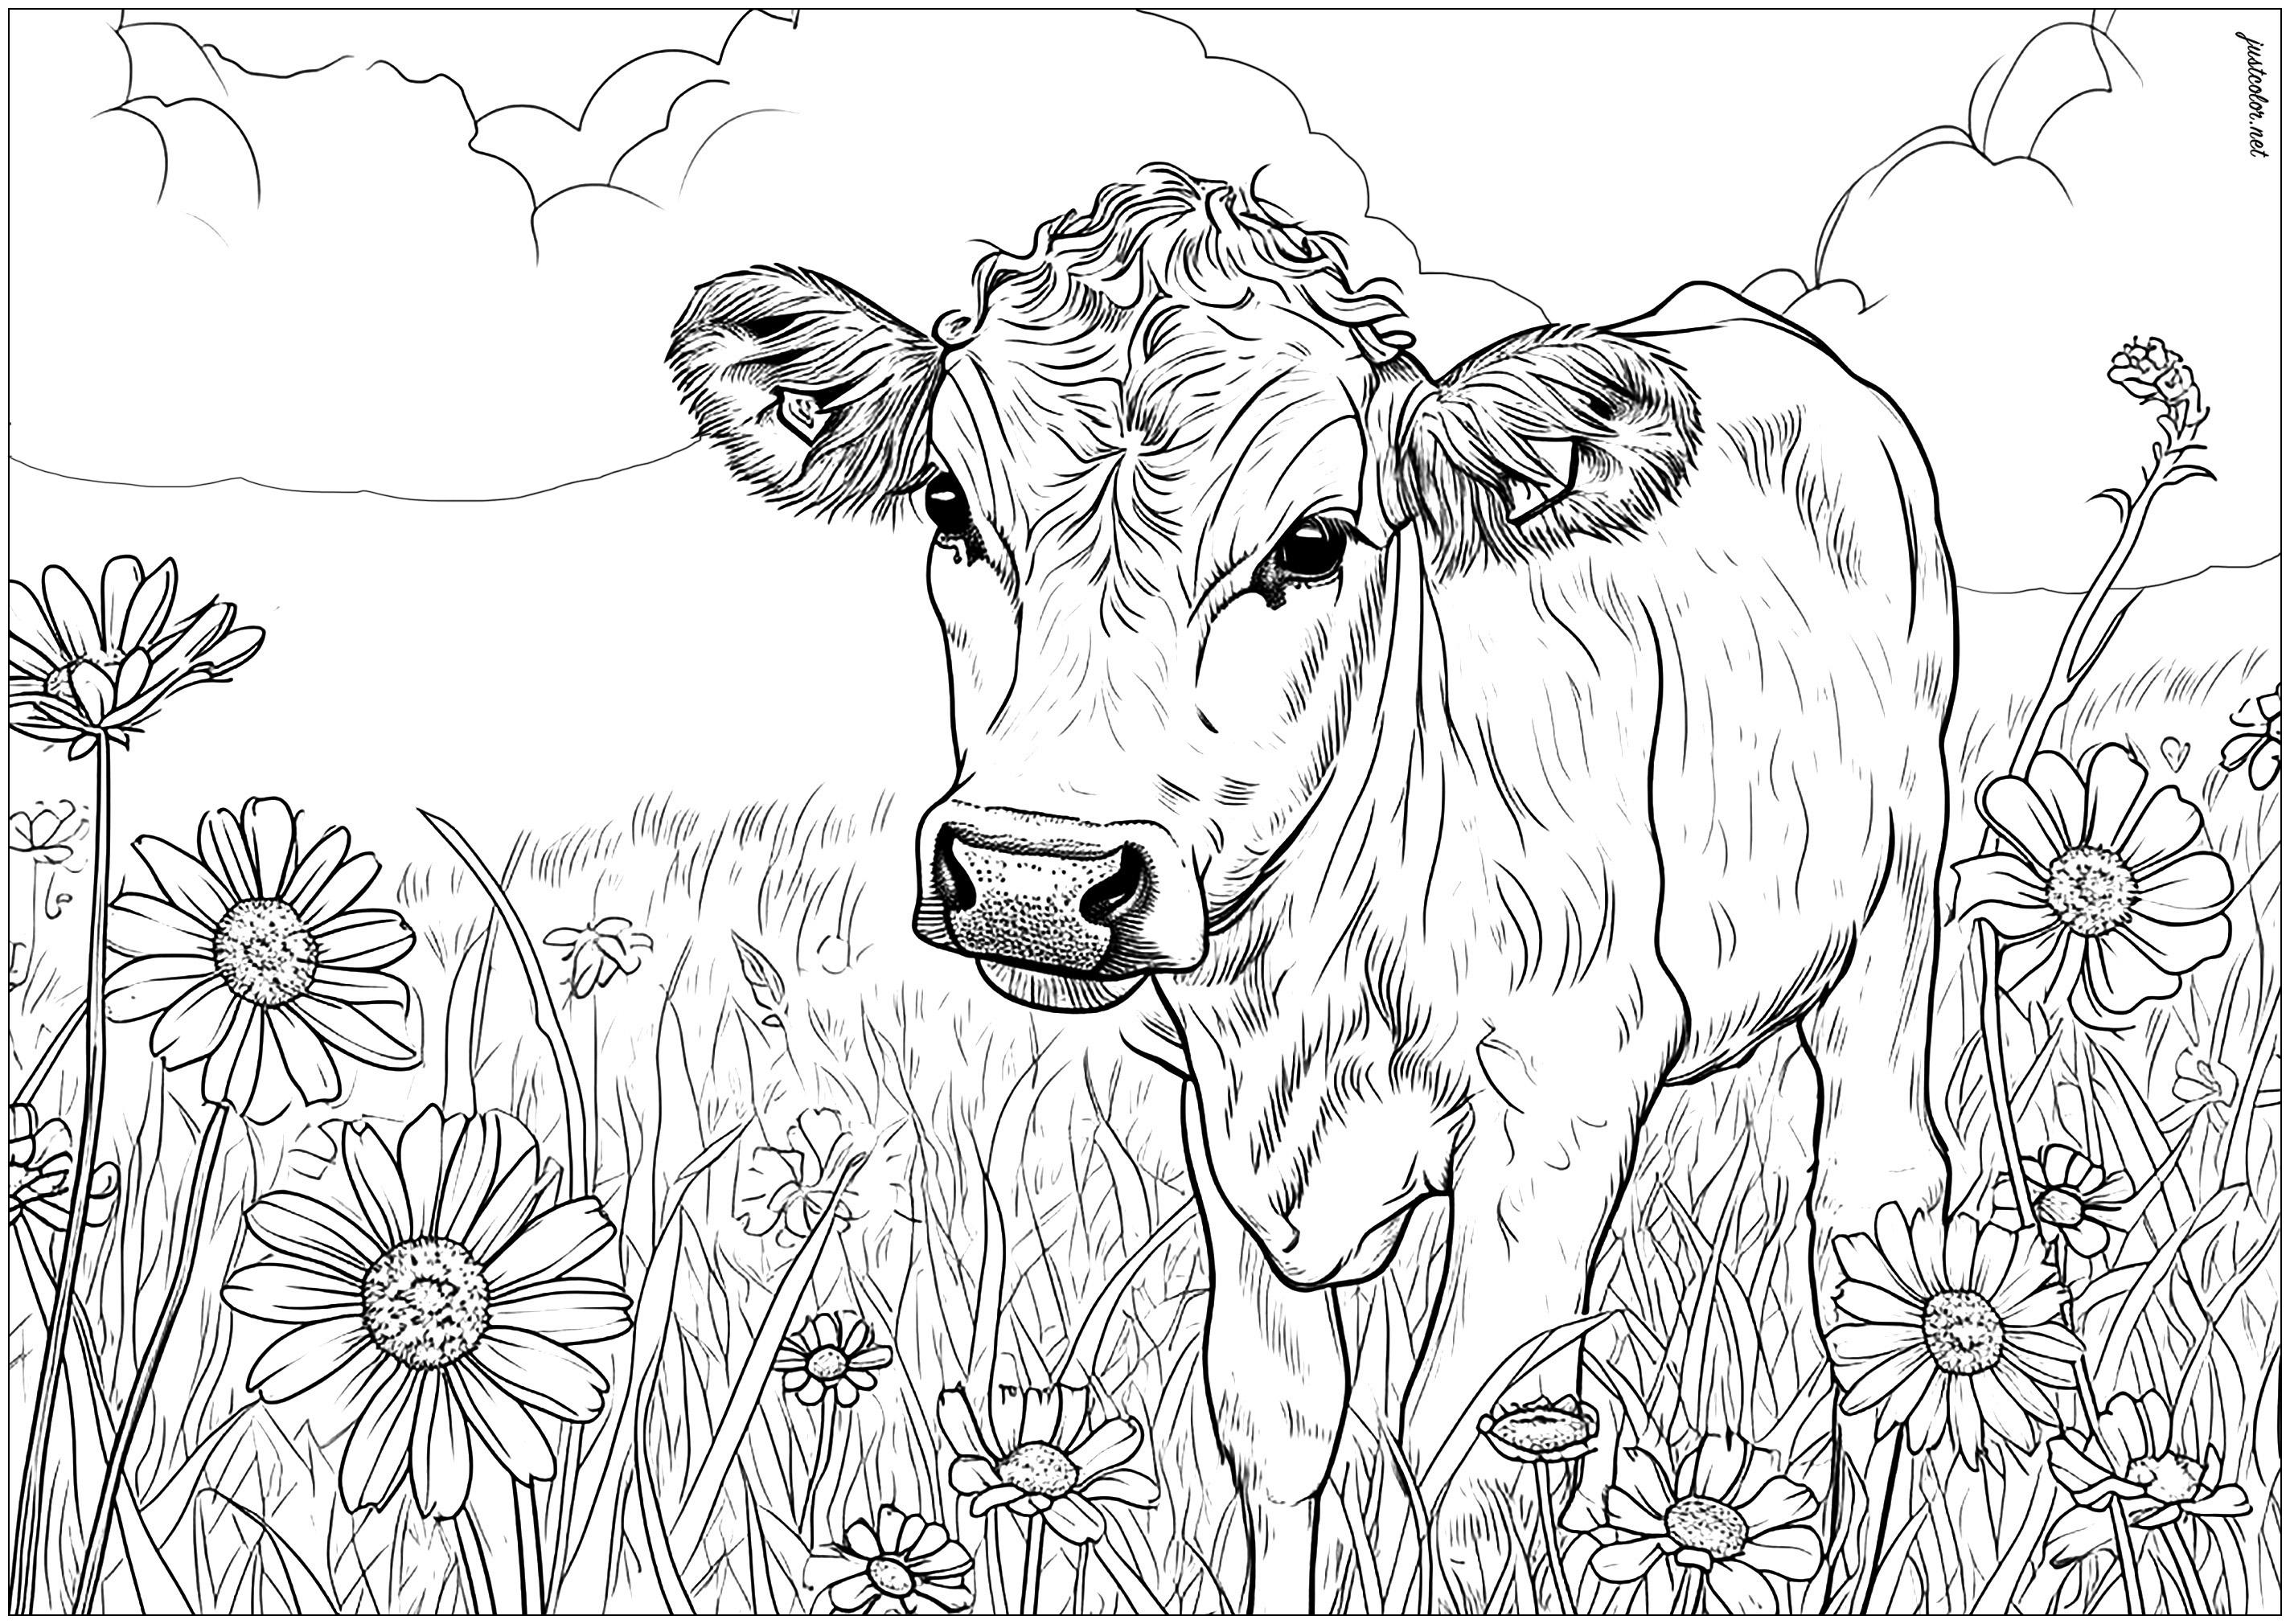 Cow in a field - 4 - Cows Adult Coloring Pages